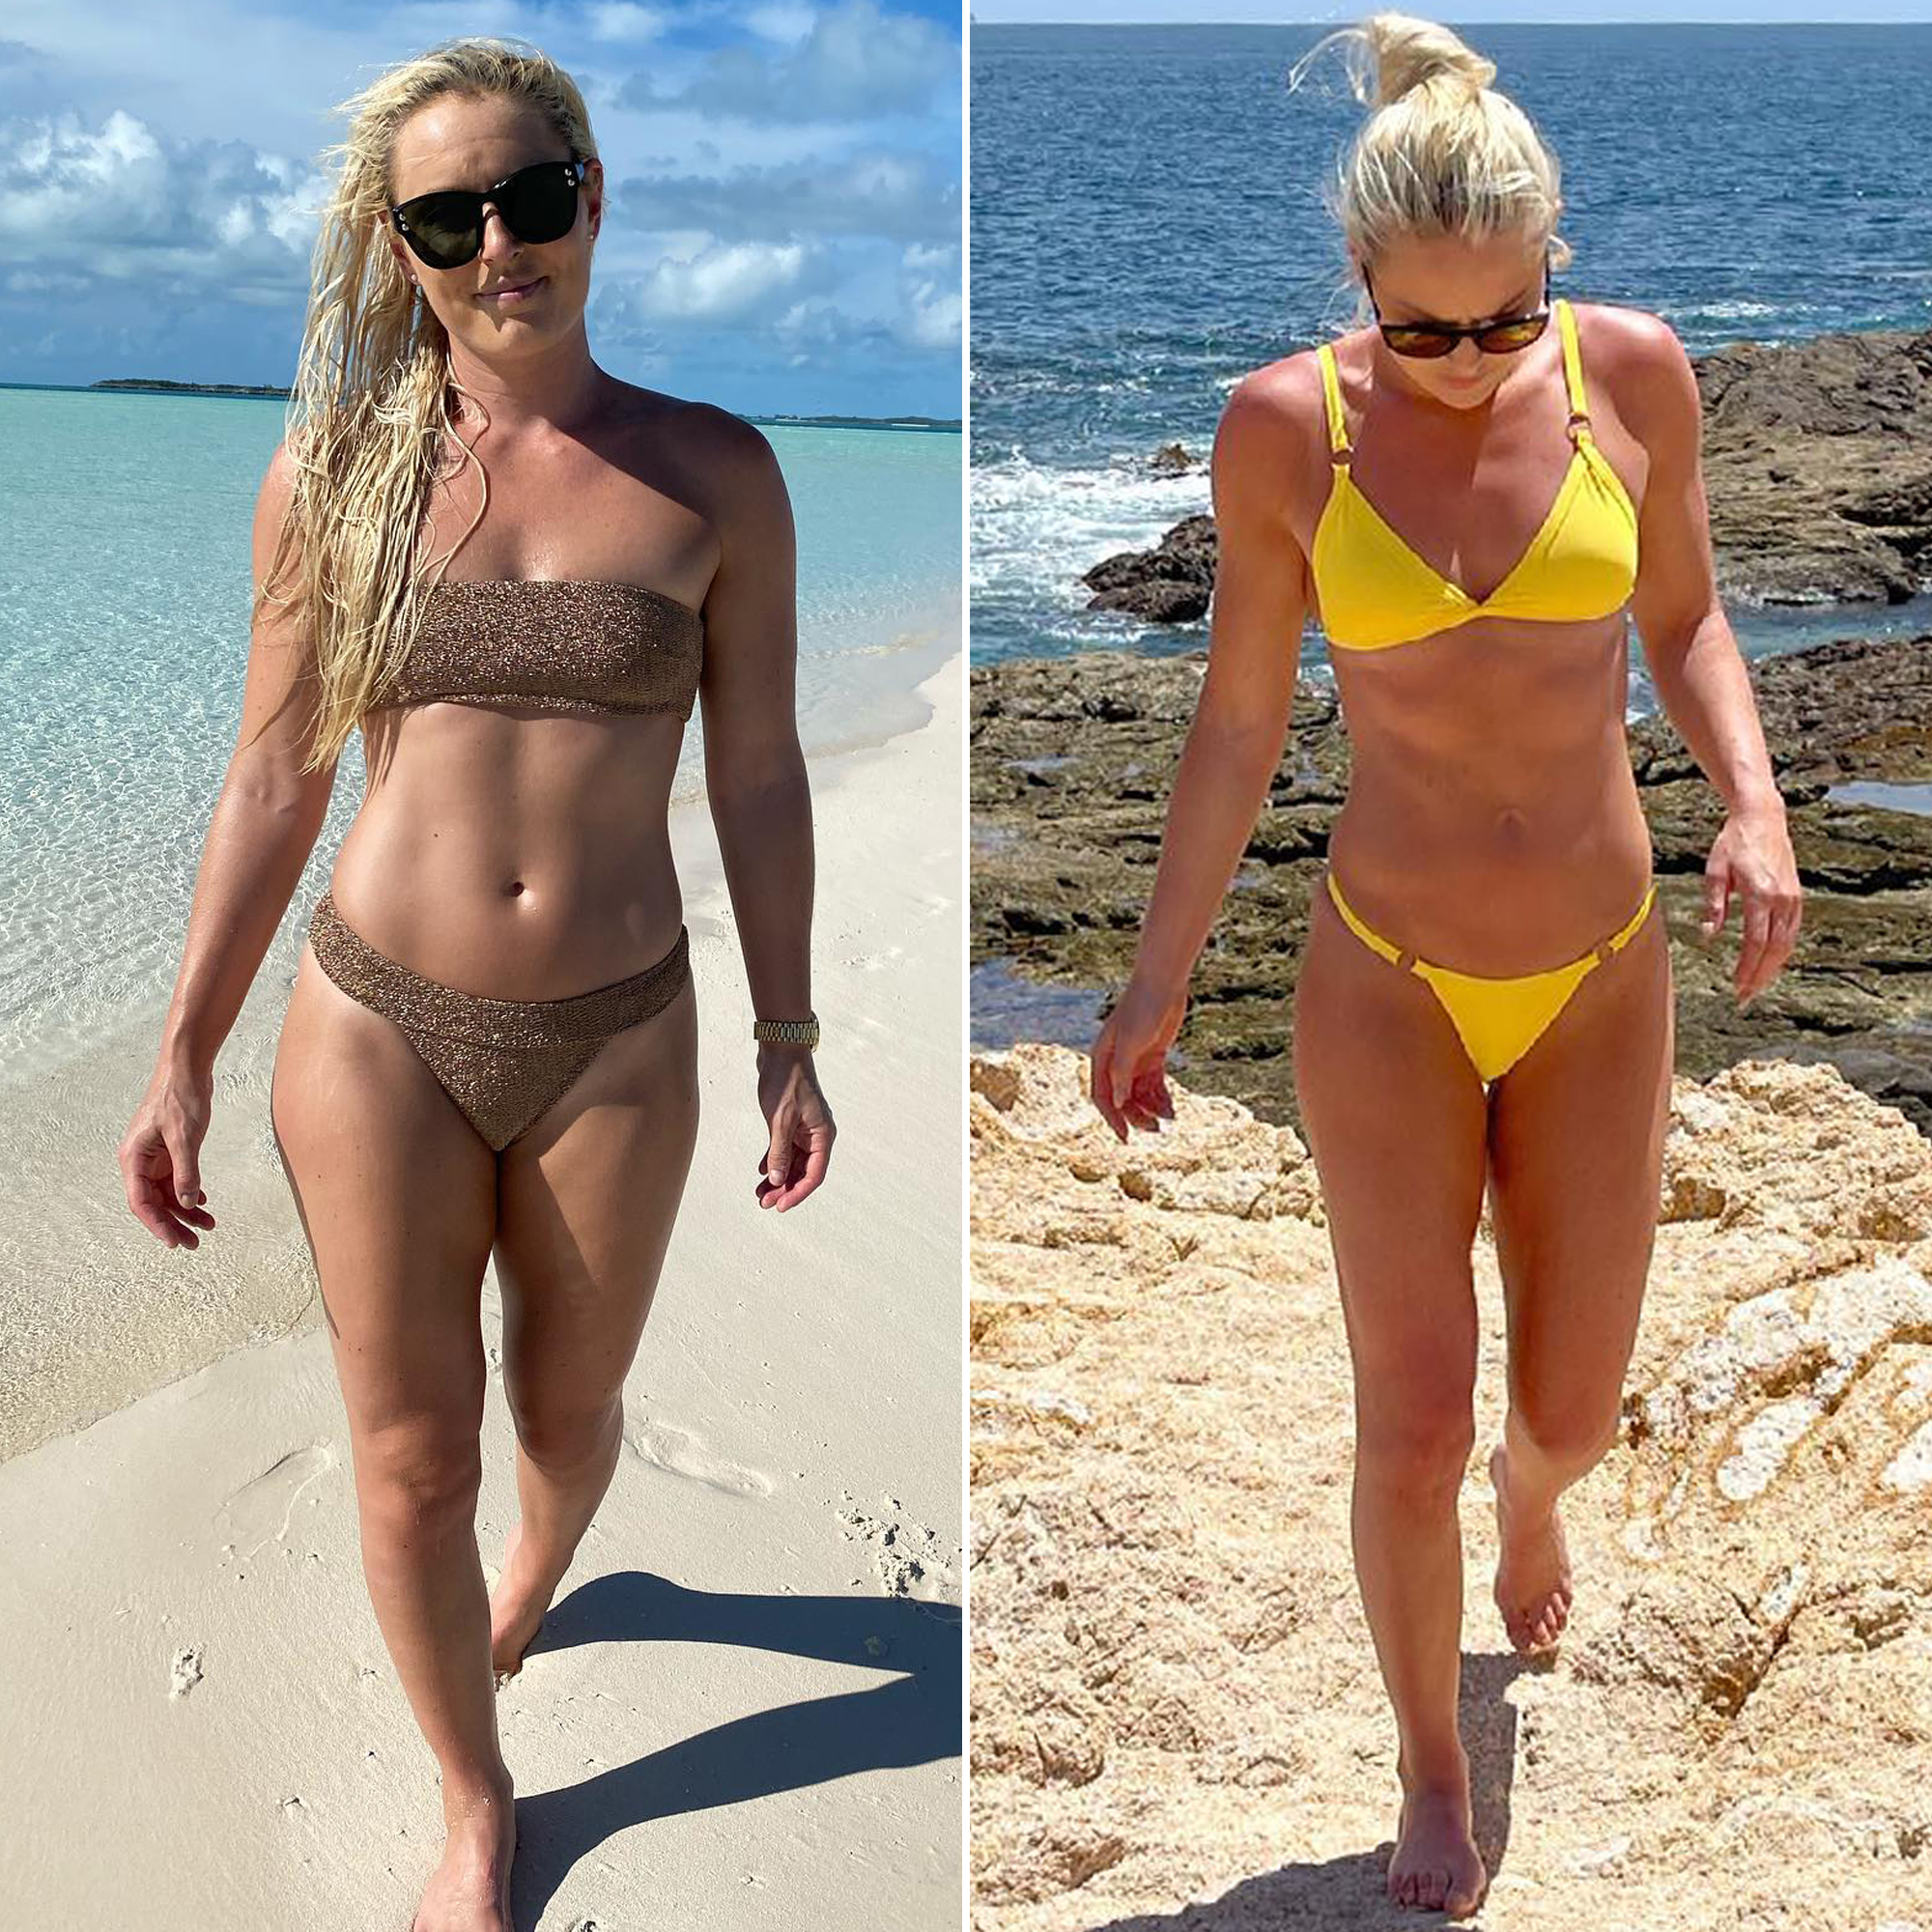 Group Nude Beach - Lindsey Vonn's Bikini Photos: See Her Sexiest Swimsuit Pictures